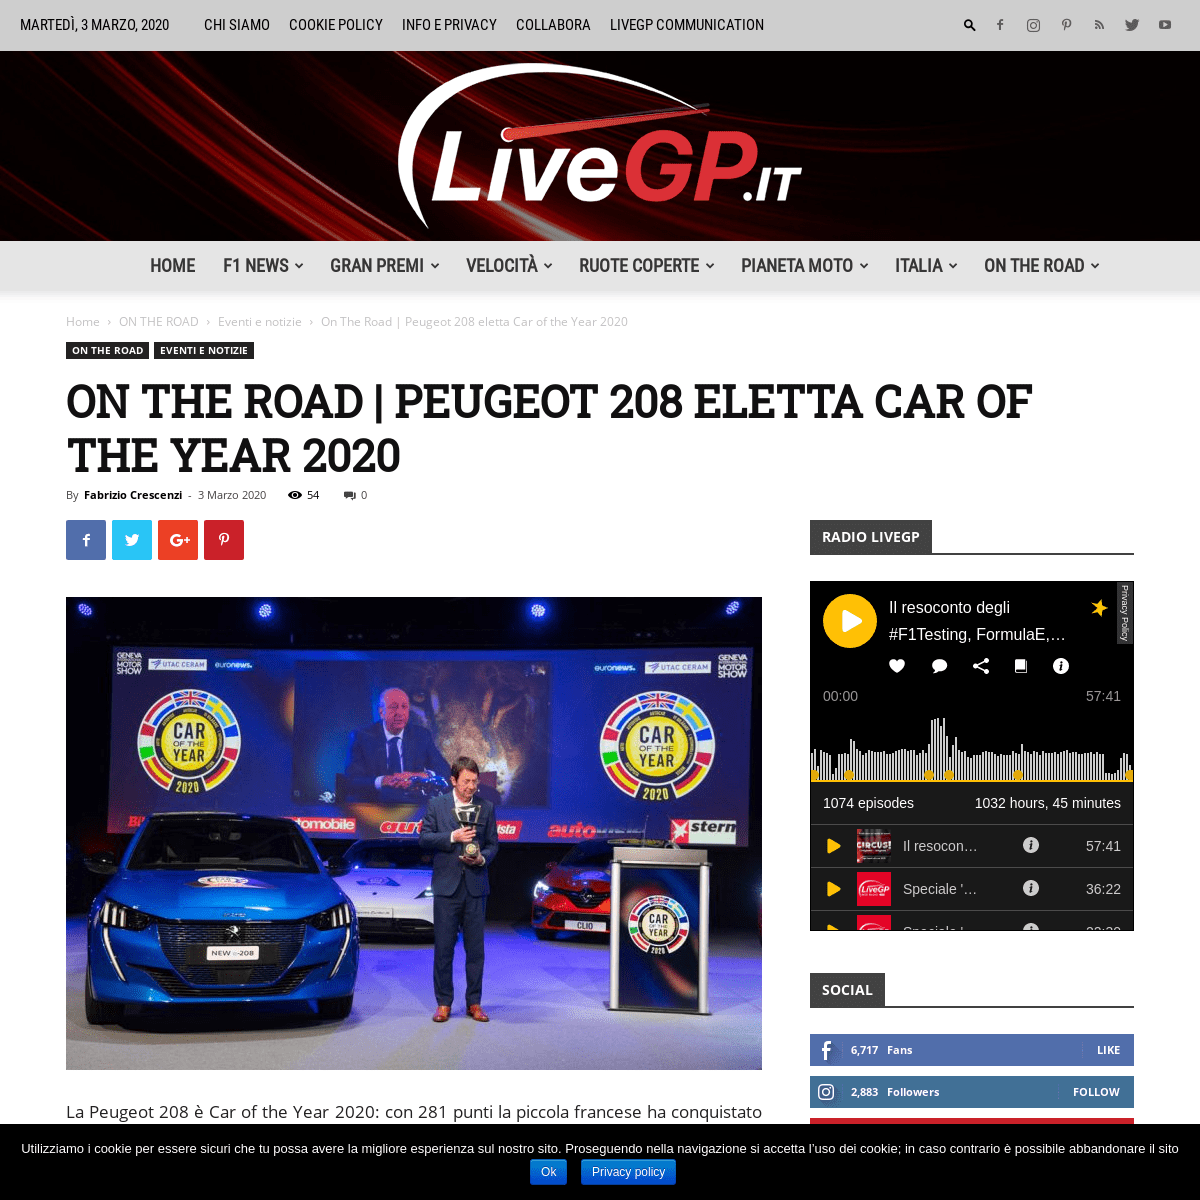 A complete backup of www.livegp.it/la-peugeot-208-e-car-of-the-year-2020/